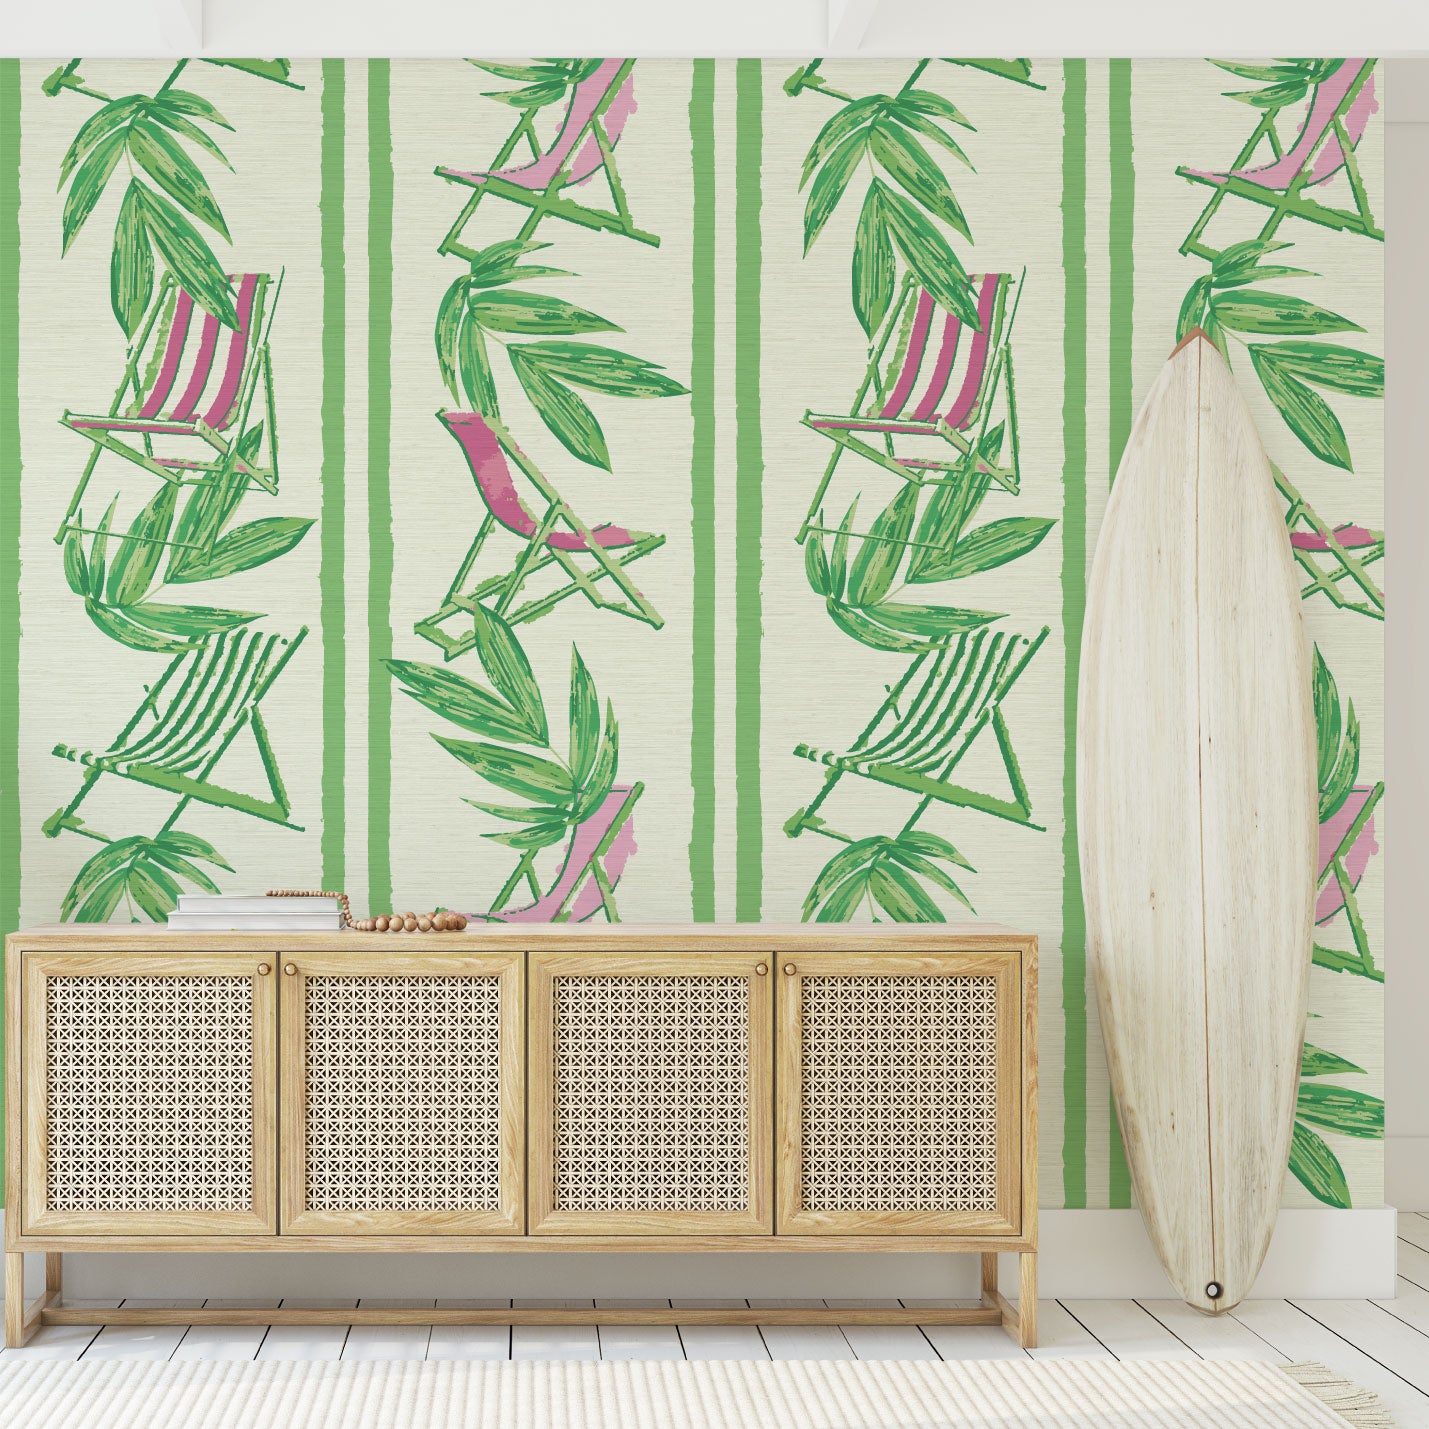 Load image into Gallery viewer, vertical linear grasscloth wallpaper print with a beachy design of green leaves and stripes paired with green and pink beach chairs arranged in a vertical oversized stripe Grasscloth Natural Textured Eco-Friendly Non-toxic High-quality  Sustainable practices Sustainability Interior Design Wall covering bold Seaside Coastal Seashore Waterfront Vacation home styling Retreat Relaxed beach vibes Beach cottage Shoreline Oceanfront Nautical entrance foyer surf shack
